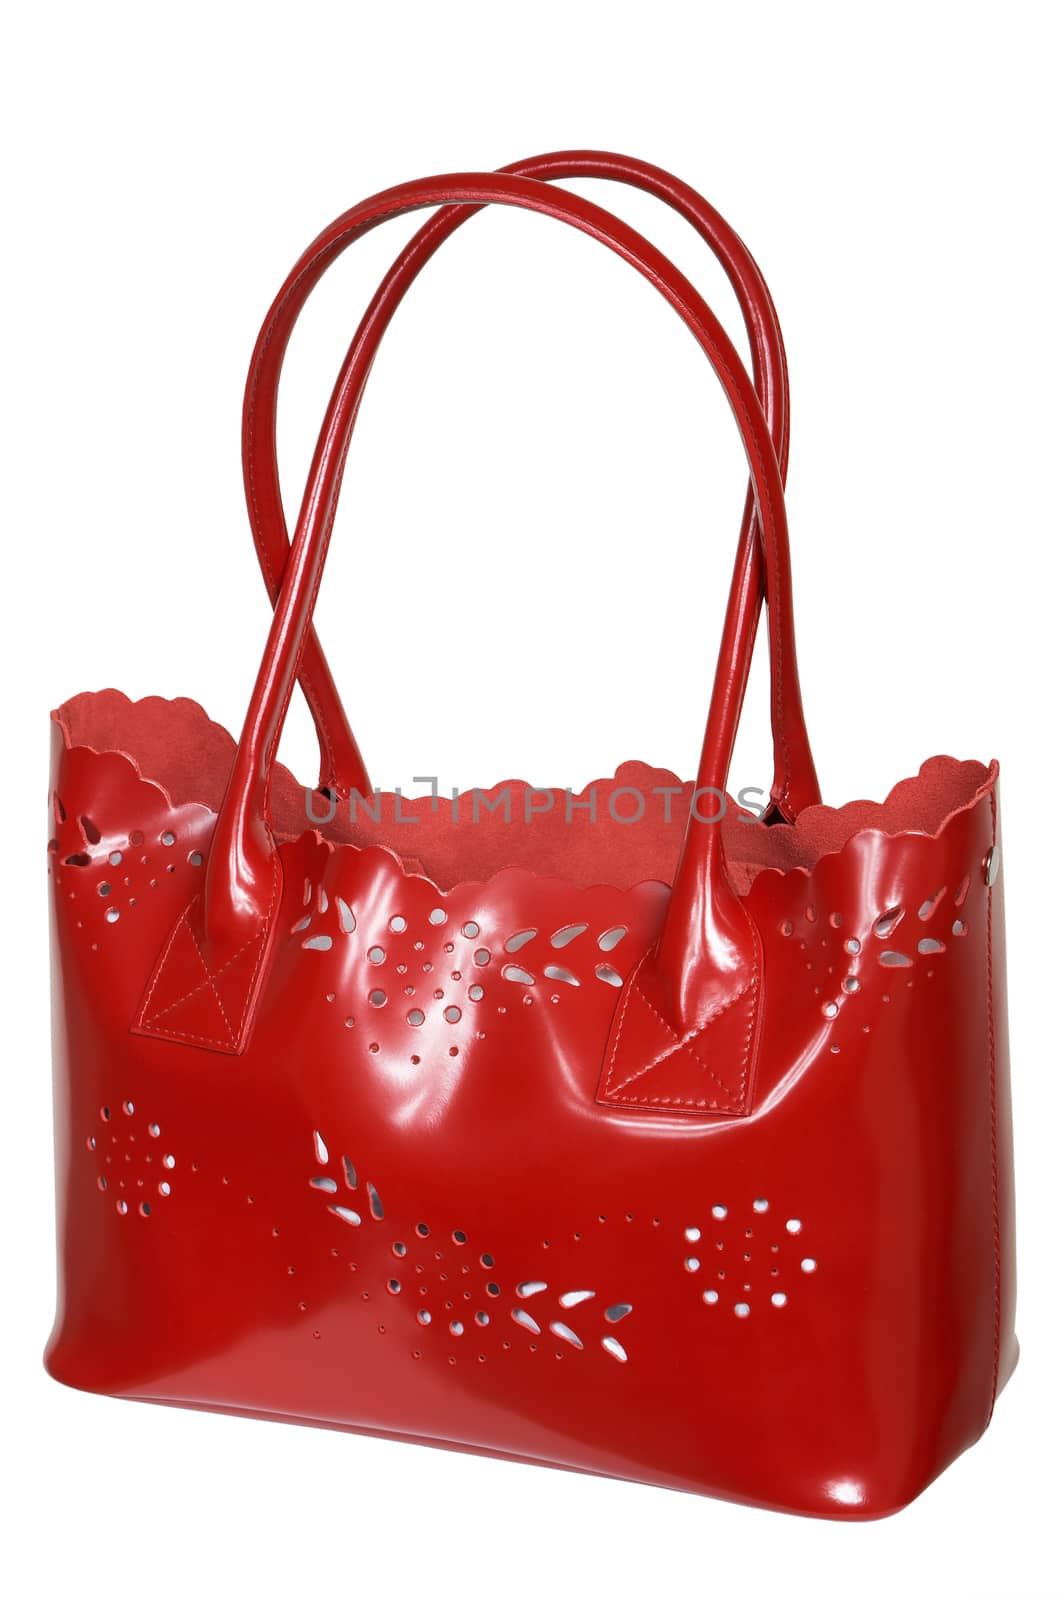 Red bag with long handles on a white background